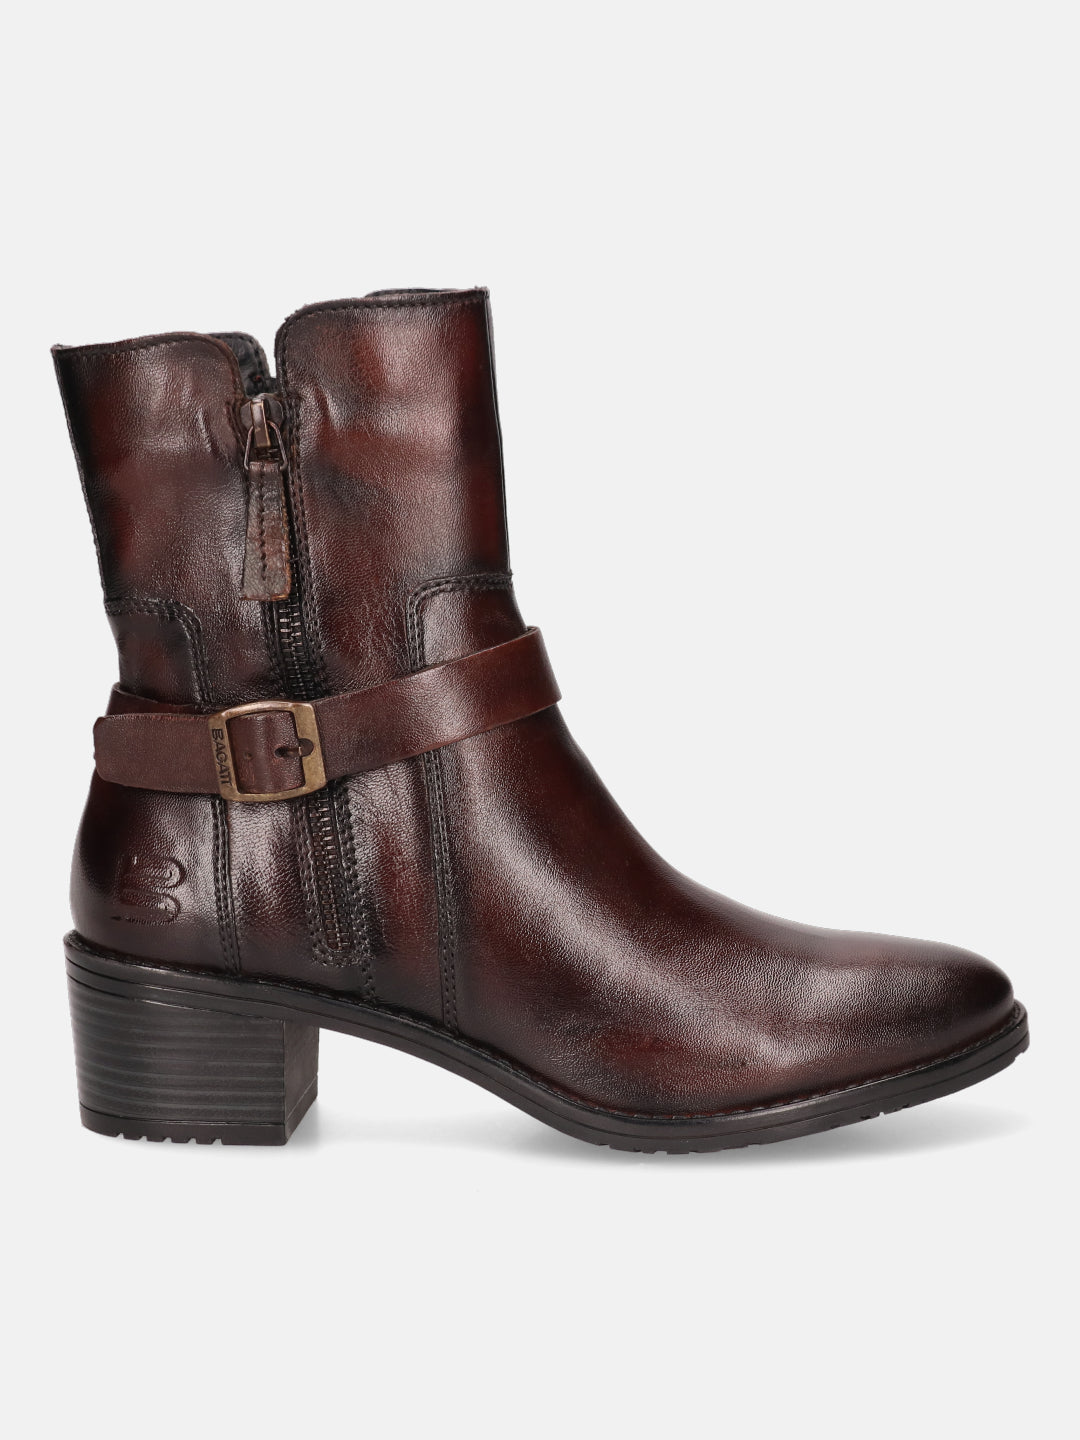 Ruby Bordo Leather Ankle Boots